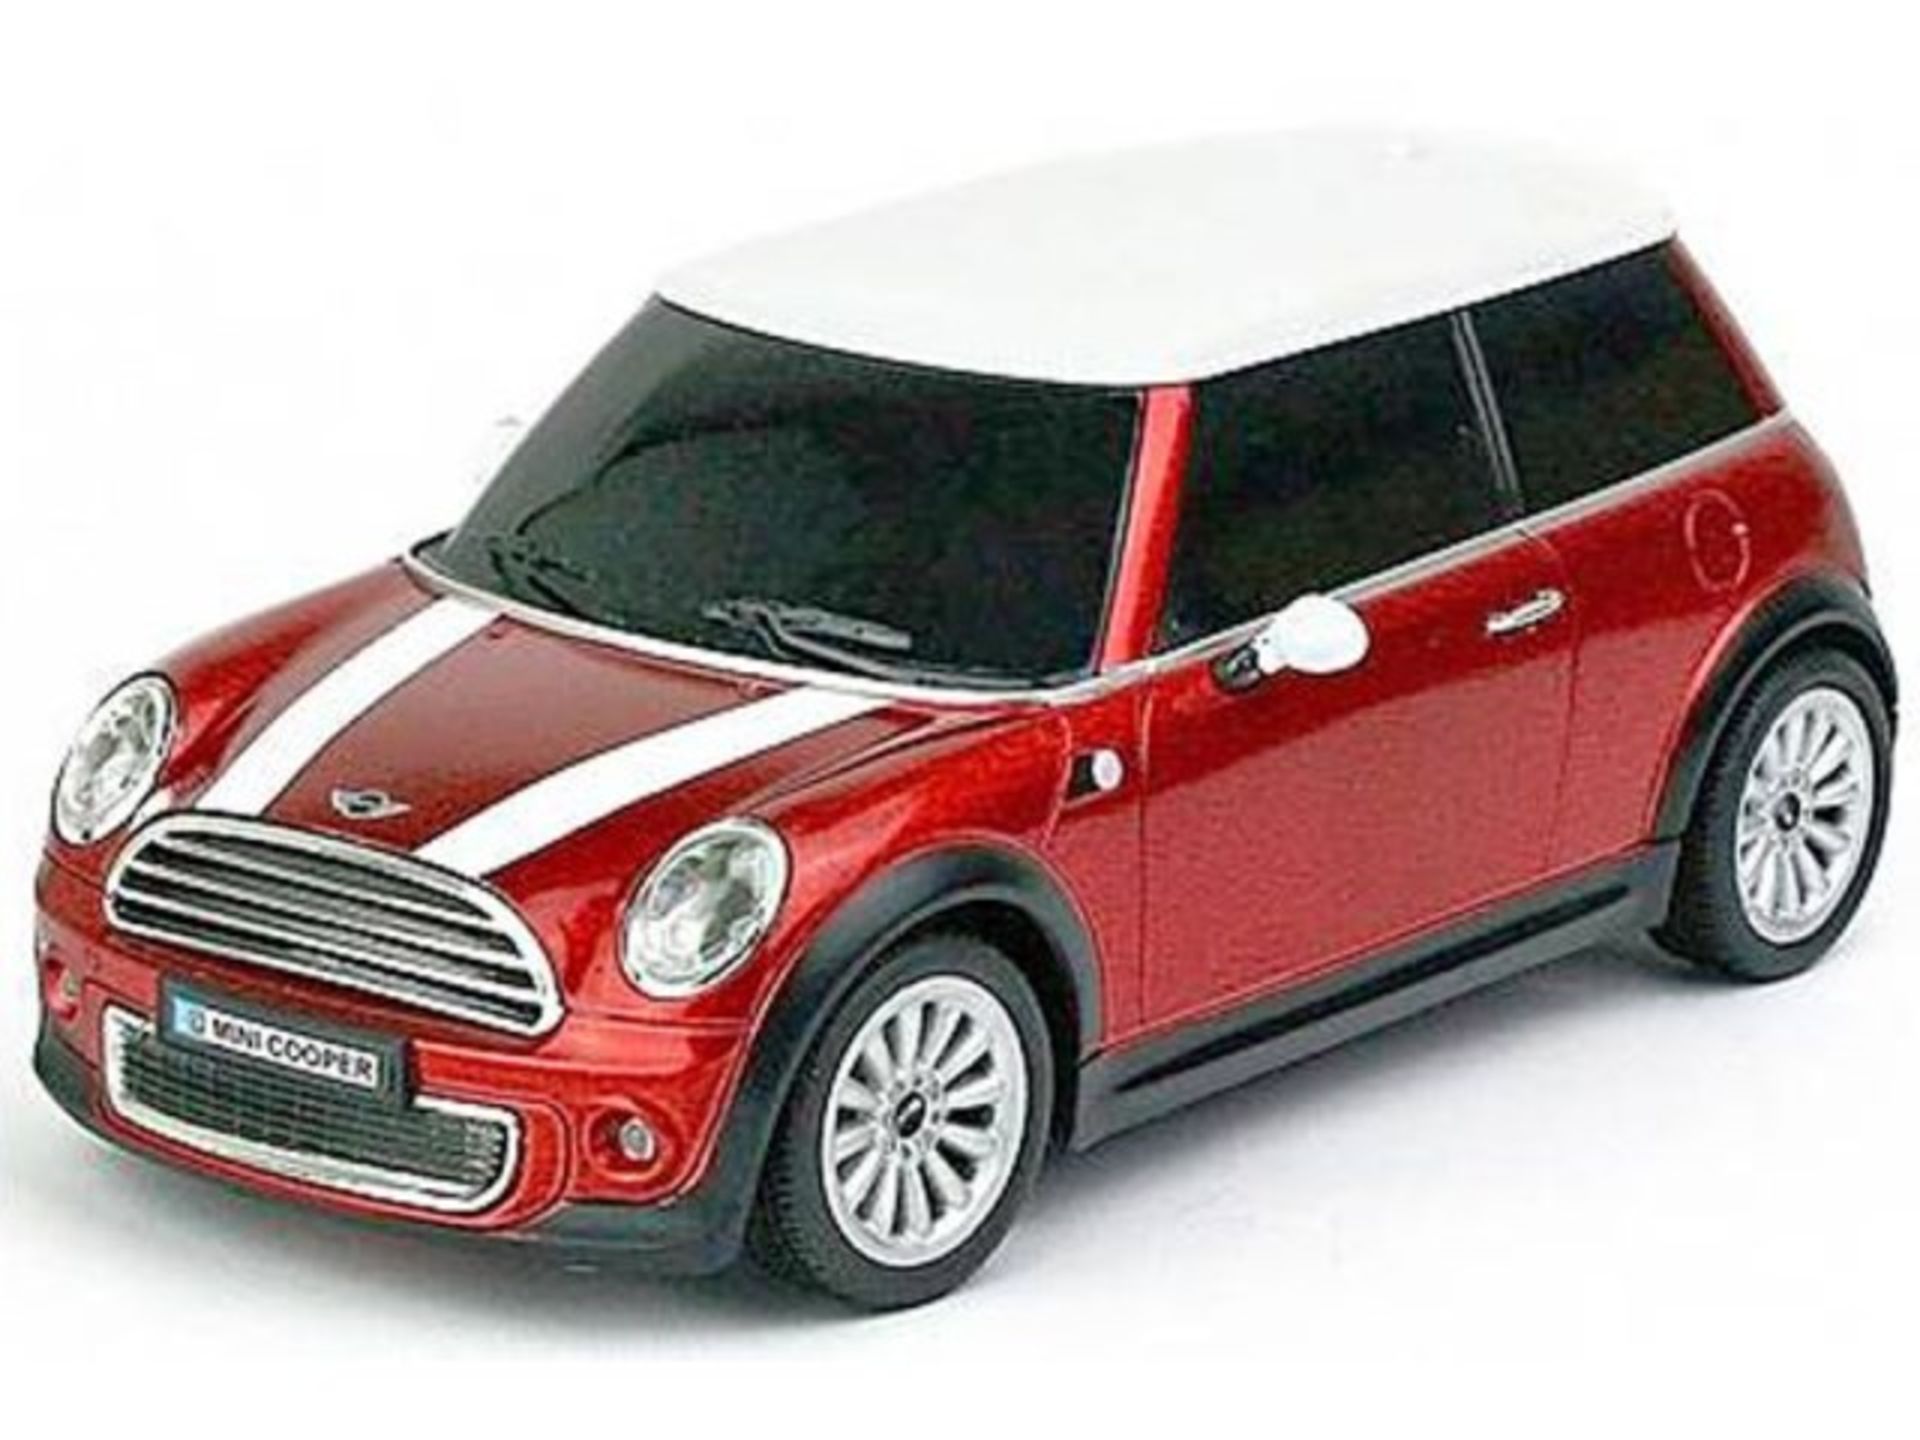 V Brand New 1:14 Scale R/C Mini Cooper S In Red Officially Licensed Product X 2 YOUR BID PRICE TO BE